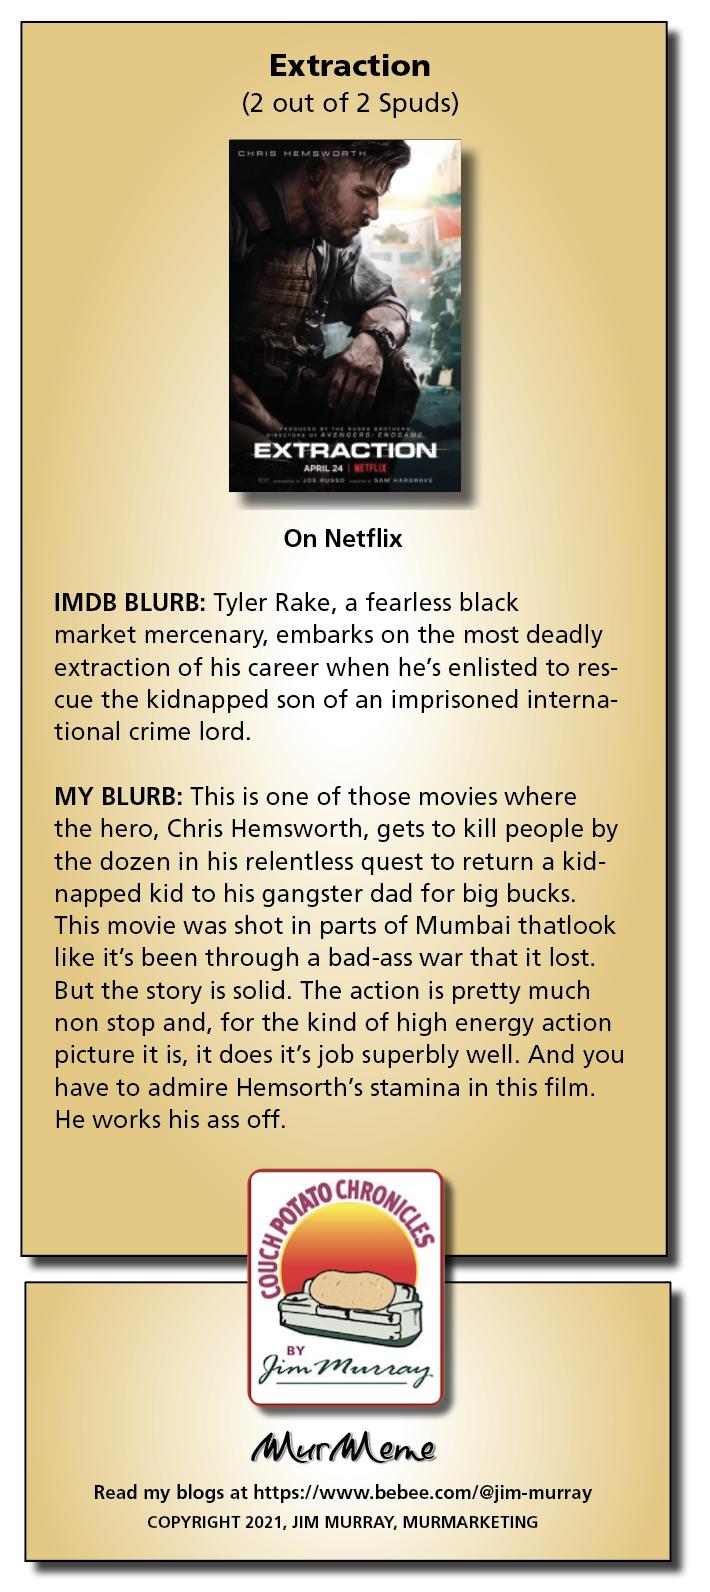 Extraction
(2 out of 2 Spuds)

On Netflix

IMDB BLURB: Tyler Rake, a fearless black

market mercenary, embarks on the most deadly
extraction of his career when he’s enlisted to res-
cue the kidnapped son of an imprisoned interna-
tional crime lord.

MY BLURB: This is one of those movies where
the hero, Chris Hemsworth, gets to kill people by
the dozen in his relentless quest to return a kid-
napped kid to his gangster dad for big bucks.
This movie was shot in parts of Mumbai thatlook
like it's been through a bad-ass war that it lost.
But the story is solid. The action is pretty much
non stop and, for the kind of high energy action
picture it is, it does it's job superbly well. And you
have to admire Hemsorth's stamina in this film.
He works his ass off.

ay
A tiny

Mur ene

Read my blogs at https:/ /www.bebee.com/@jim-murray
COPYRIGHT 2021, JIM MURRAY, MURMARKETING